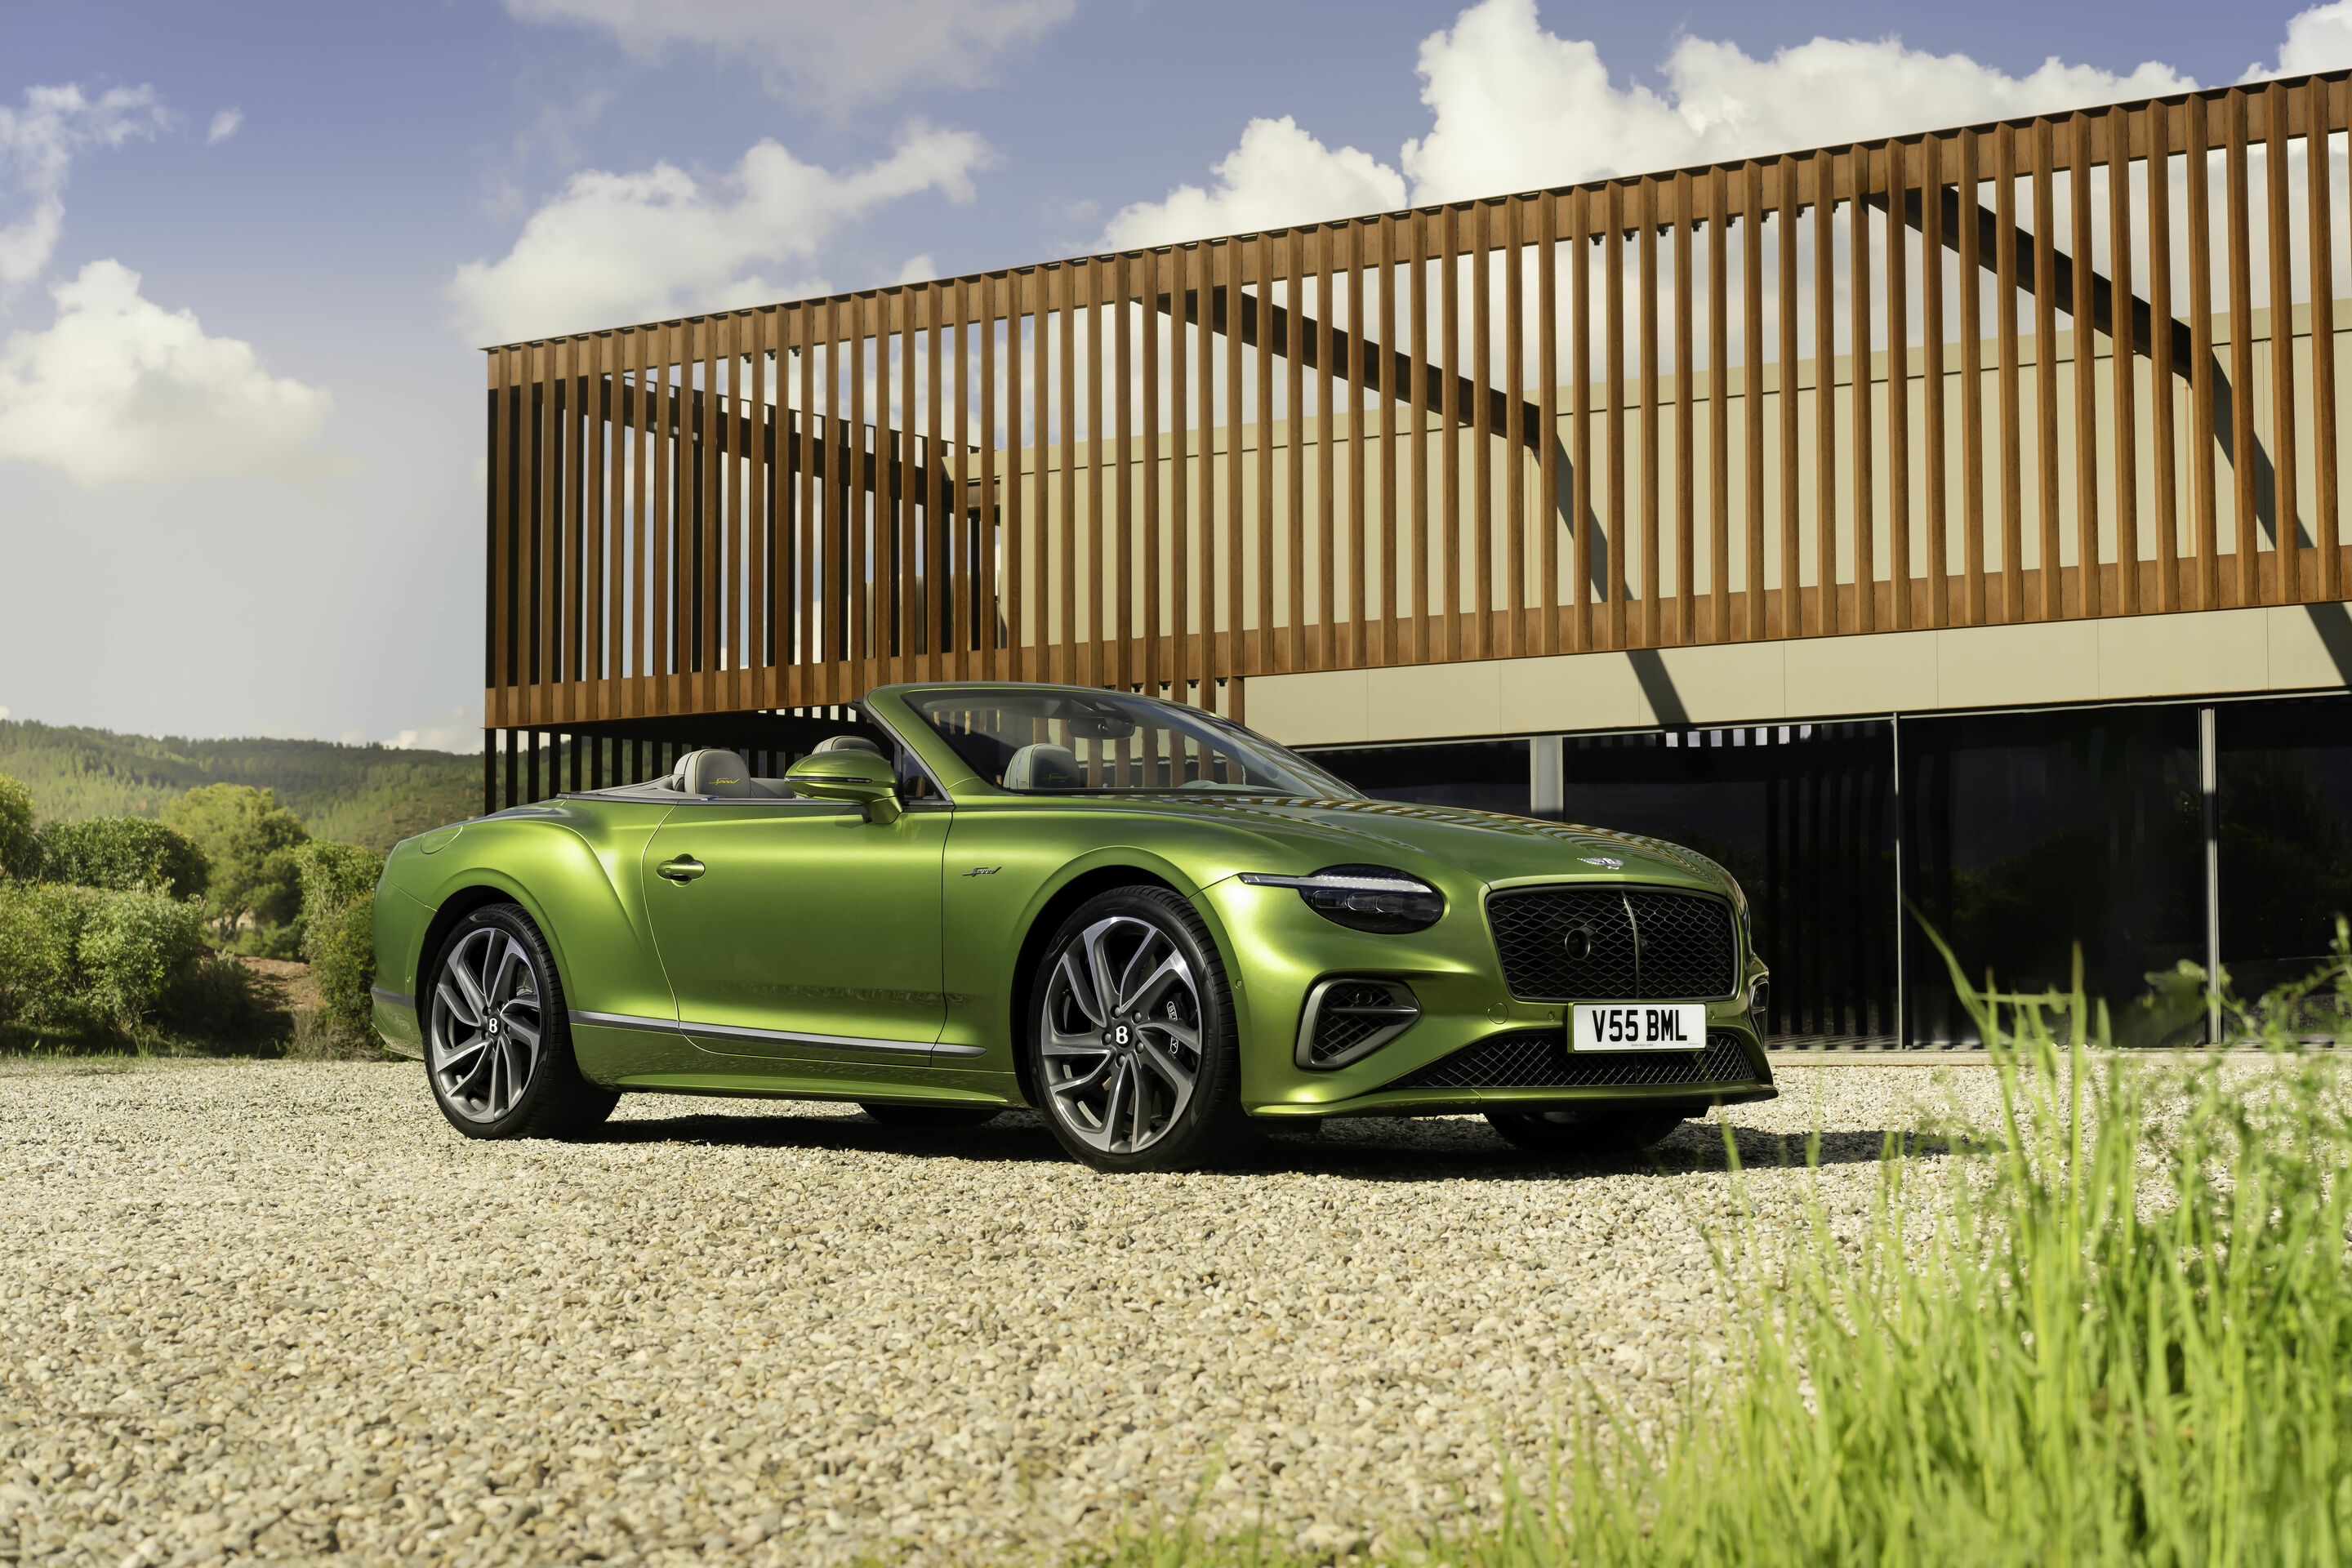 The new Continental GT Speed: Redefining the definitive grand tourer